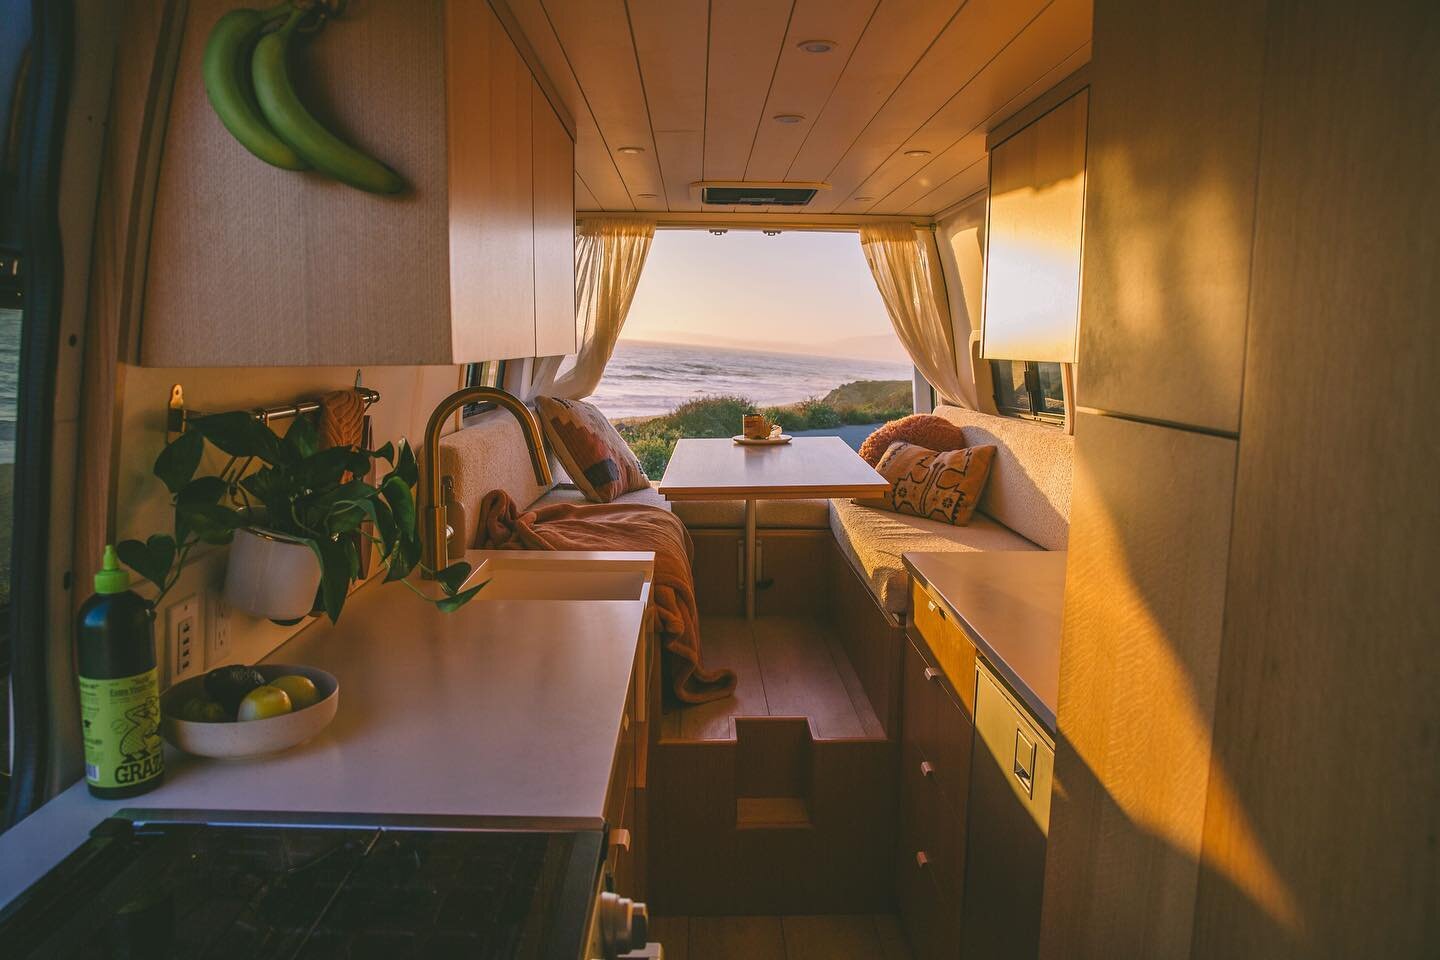 A little Van tour of my Sprinter conversion that I designed last year with my father. It was built through my family&rsquo;s architectural wood working company and I think for a first go at van interiors we did pretty great. I took her on her first t